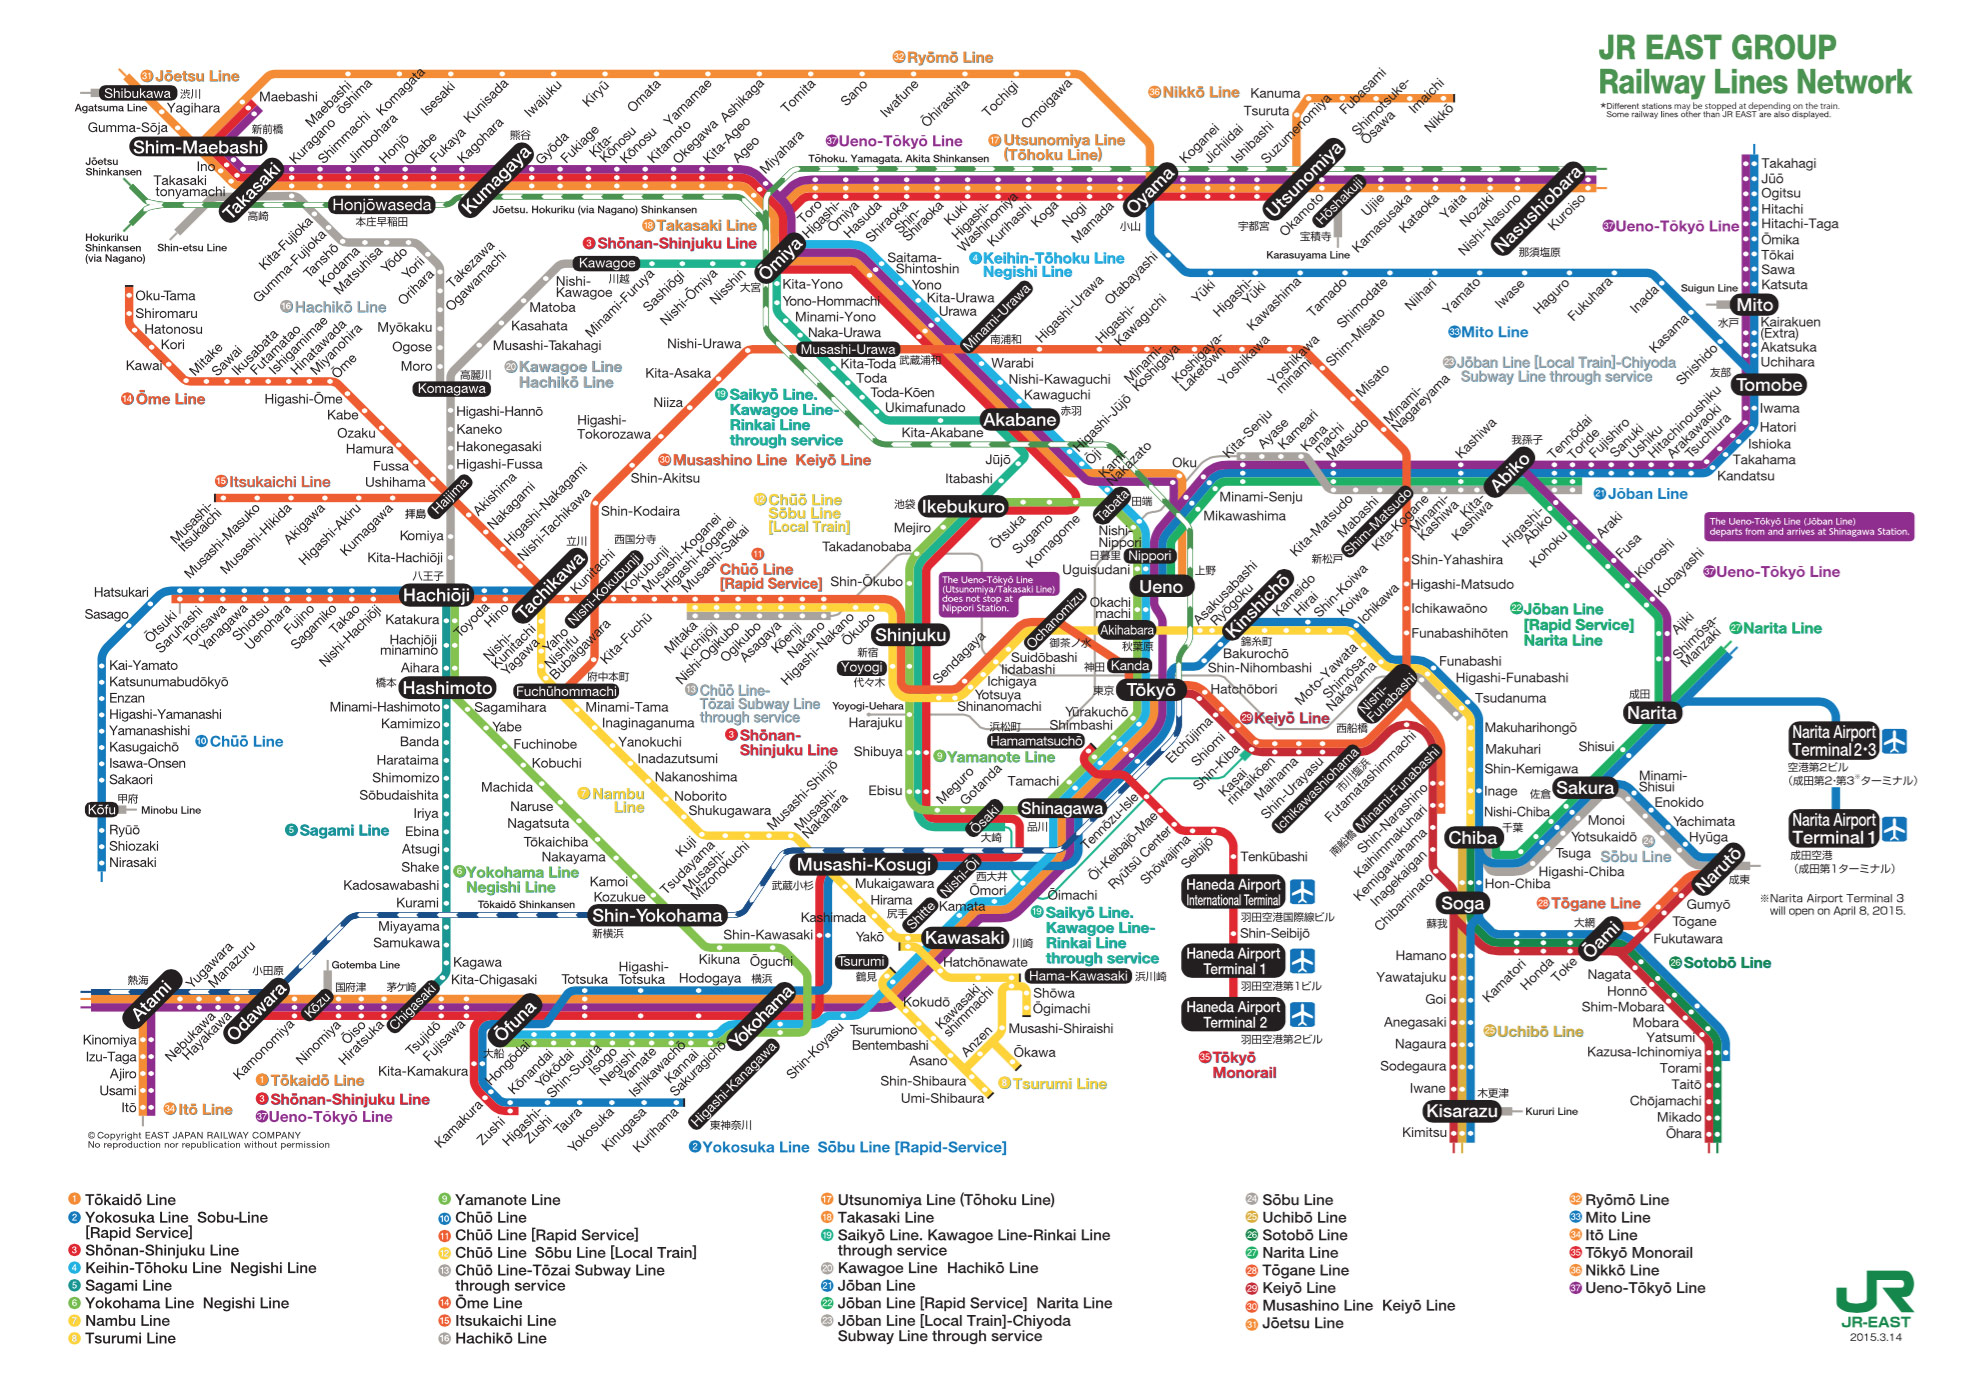 Japan Rail Lines & Types of Trains - JAPANESE TRAINS